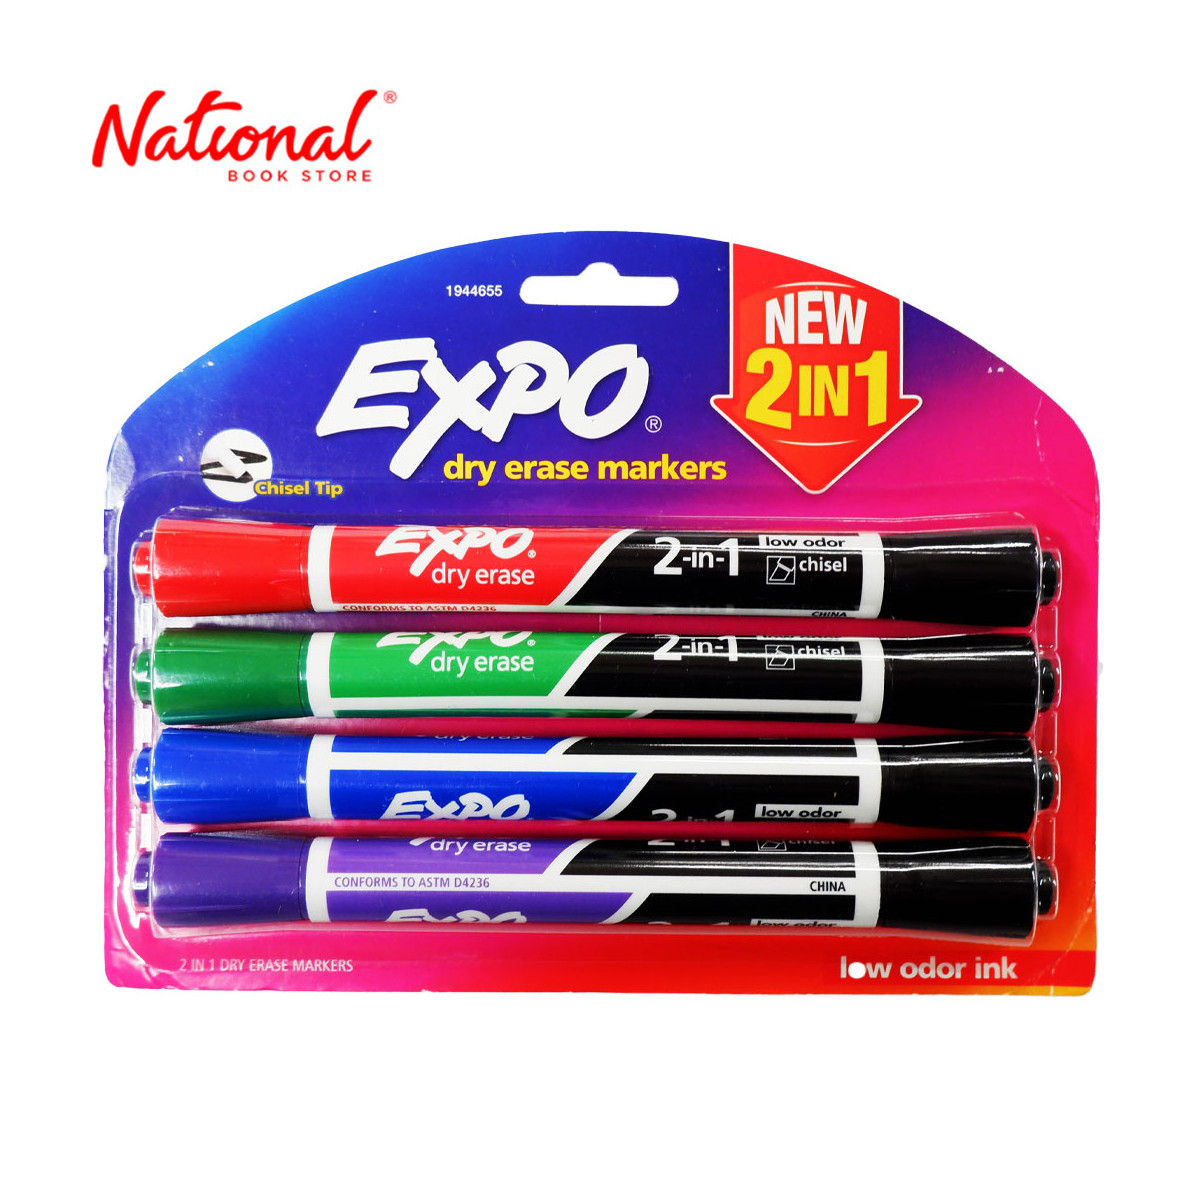 Expo 2-in-1 Dry Erase Whiteboard Markers 4's Chisel Tip 4016635